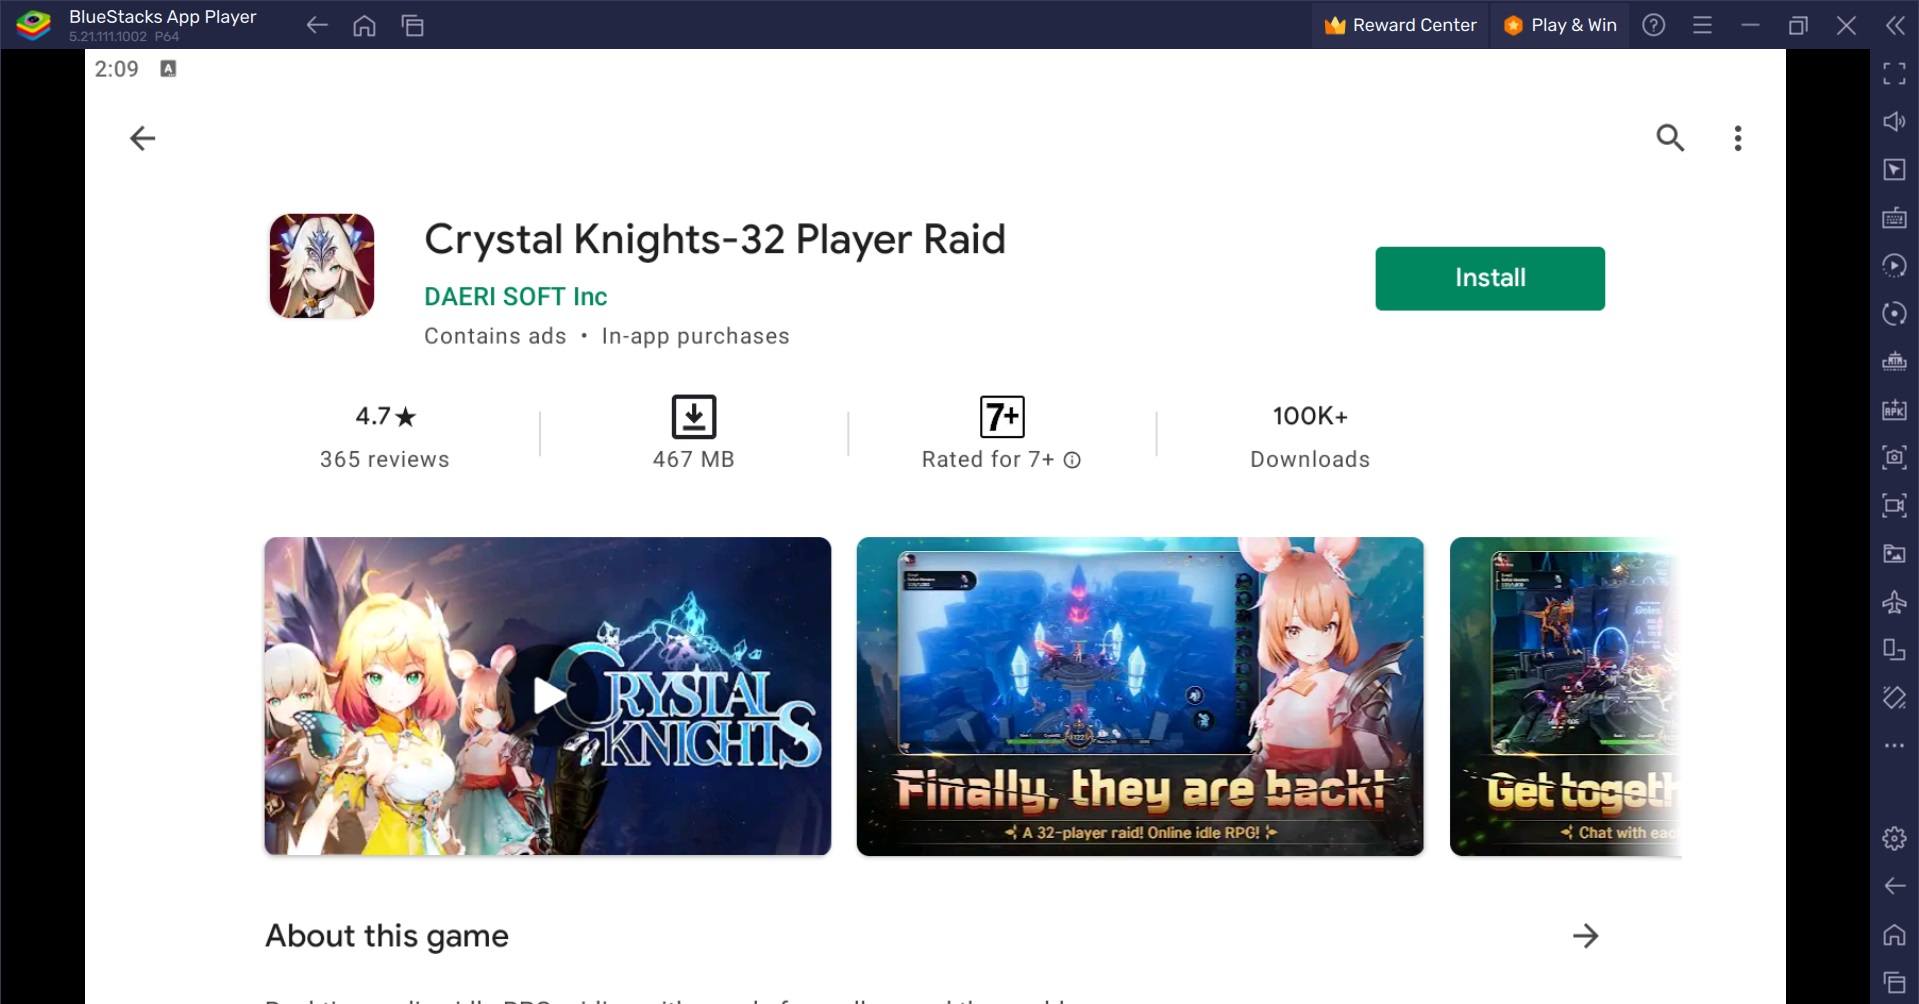 How to Play Crystal Knights-32 Player Raid on PC with BlueStacks